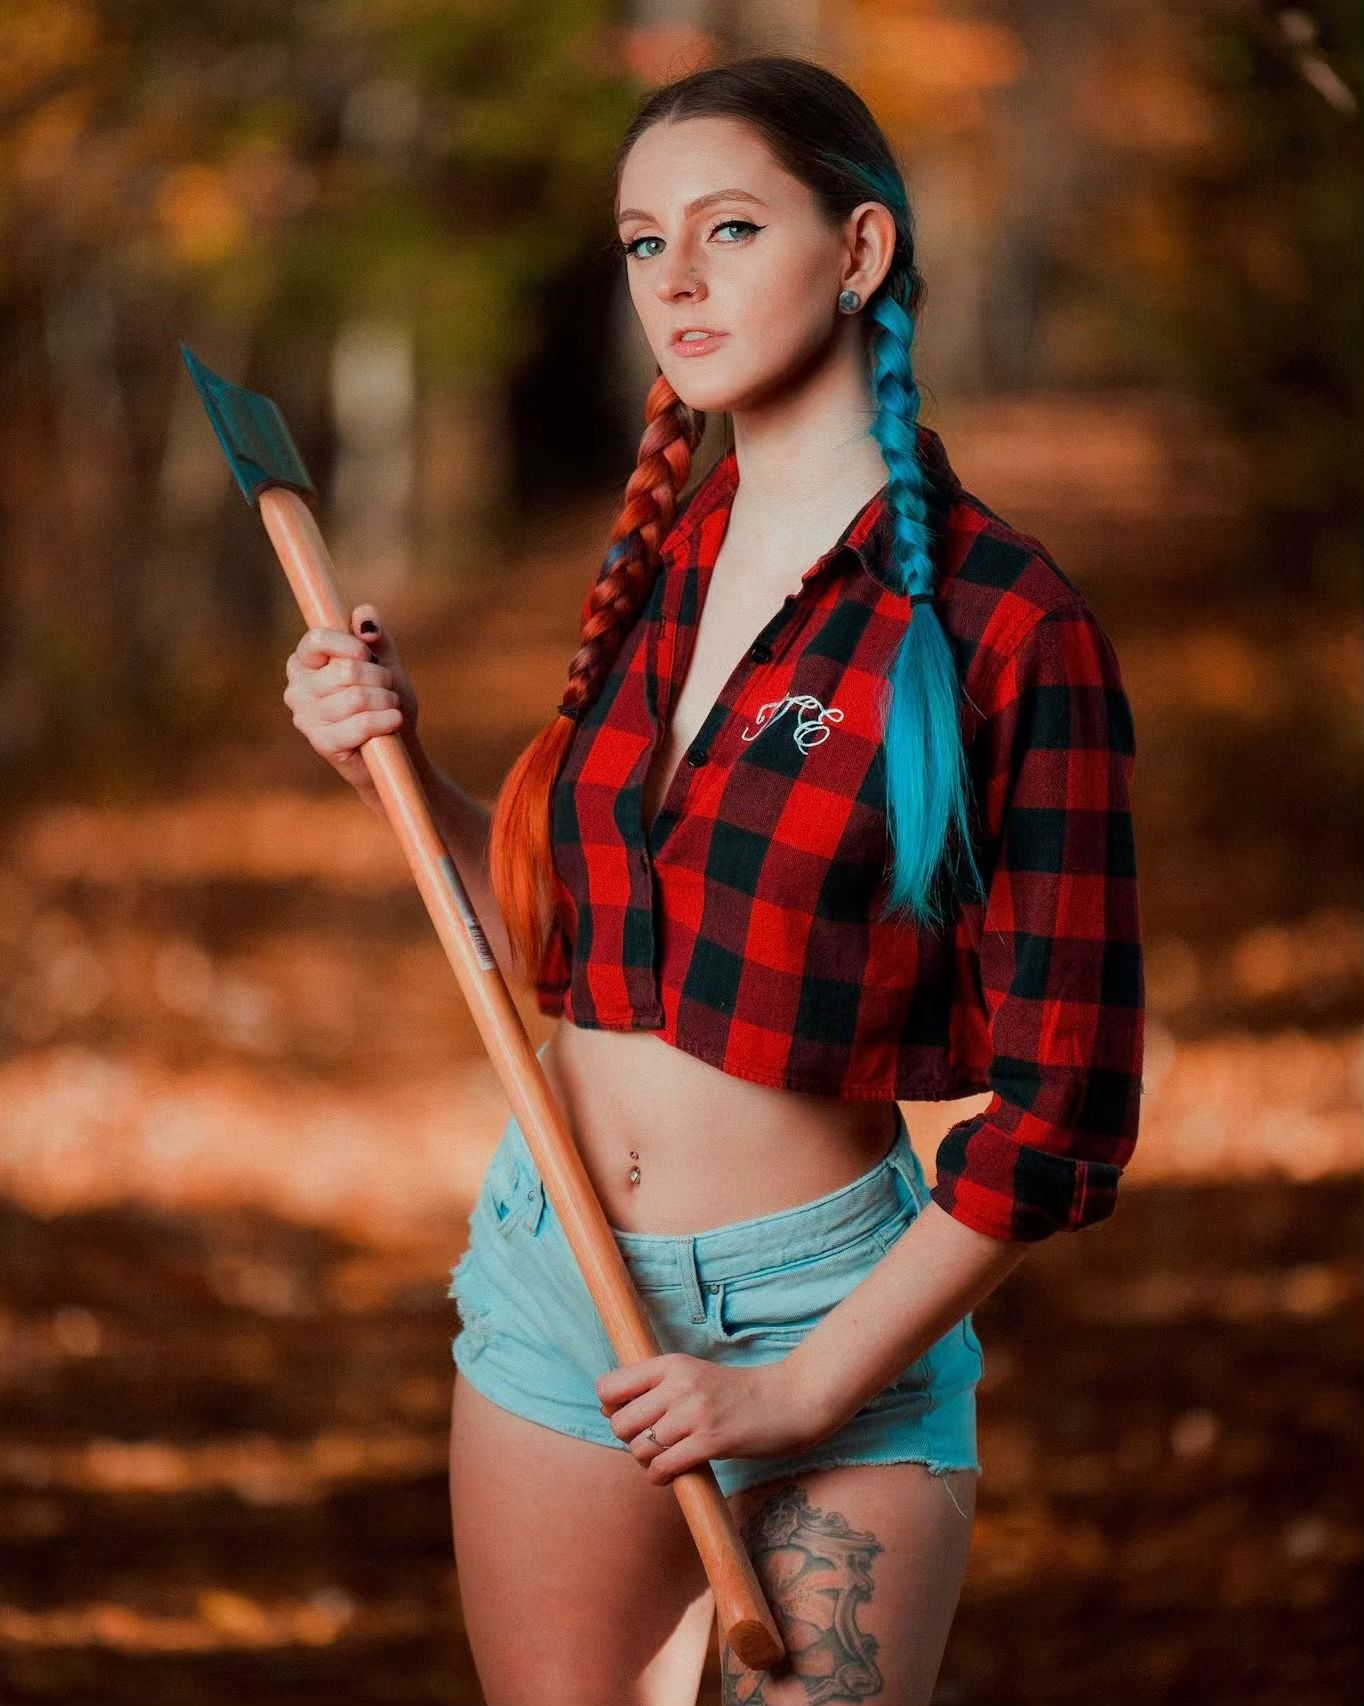 Is that hardwood in yer pants or are ya just happy to see me 🤭😏😅

Give me your best lumberjack joke! 

Amazing shots by @ernestojavier.photography